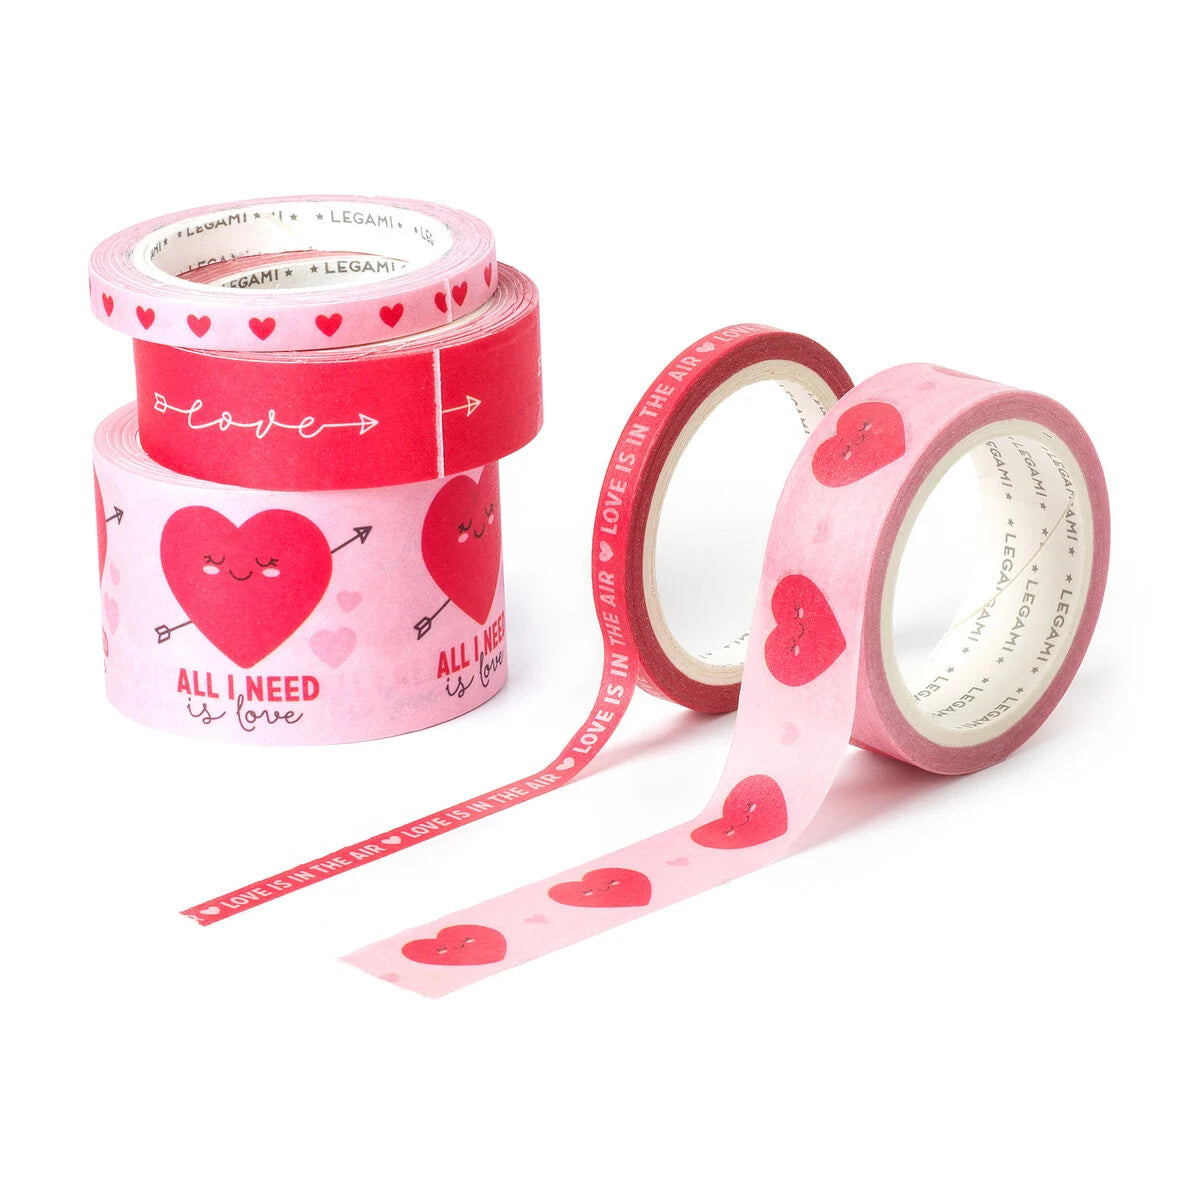 Stationery Legami Tape By Tape Heart by Weirs of Baggot Street